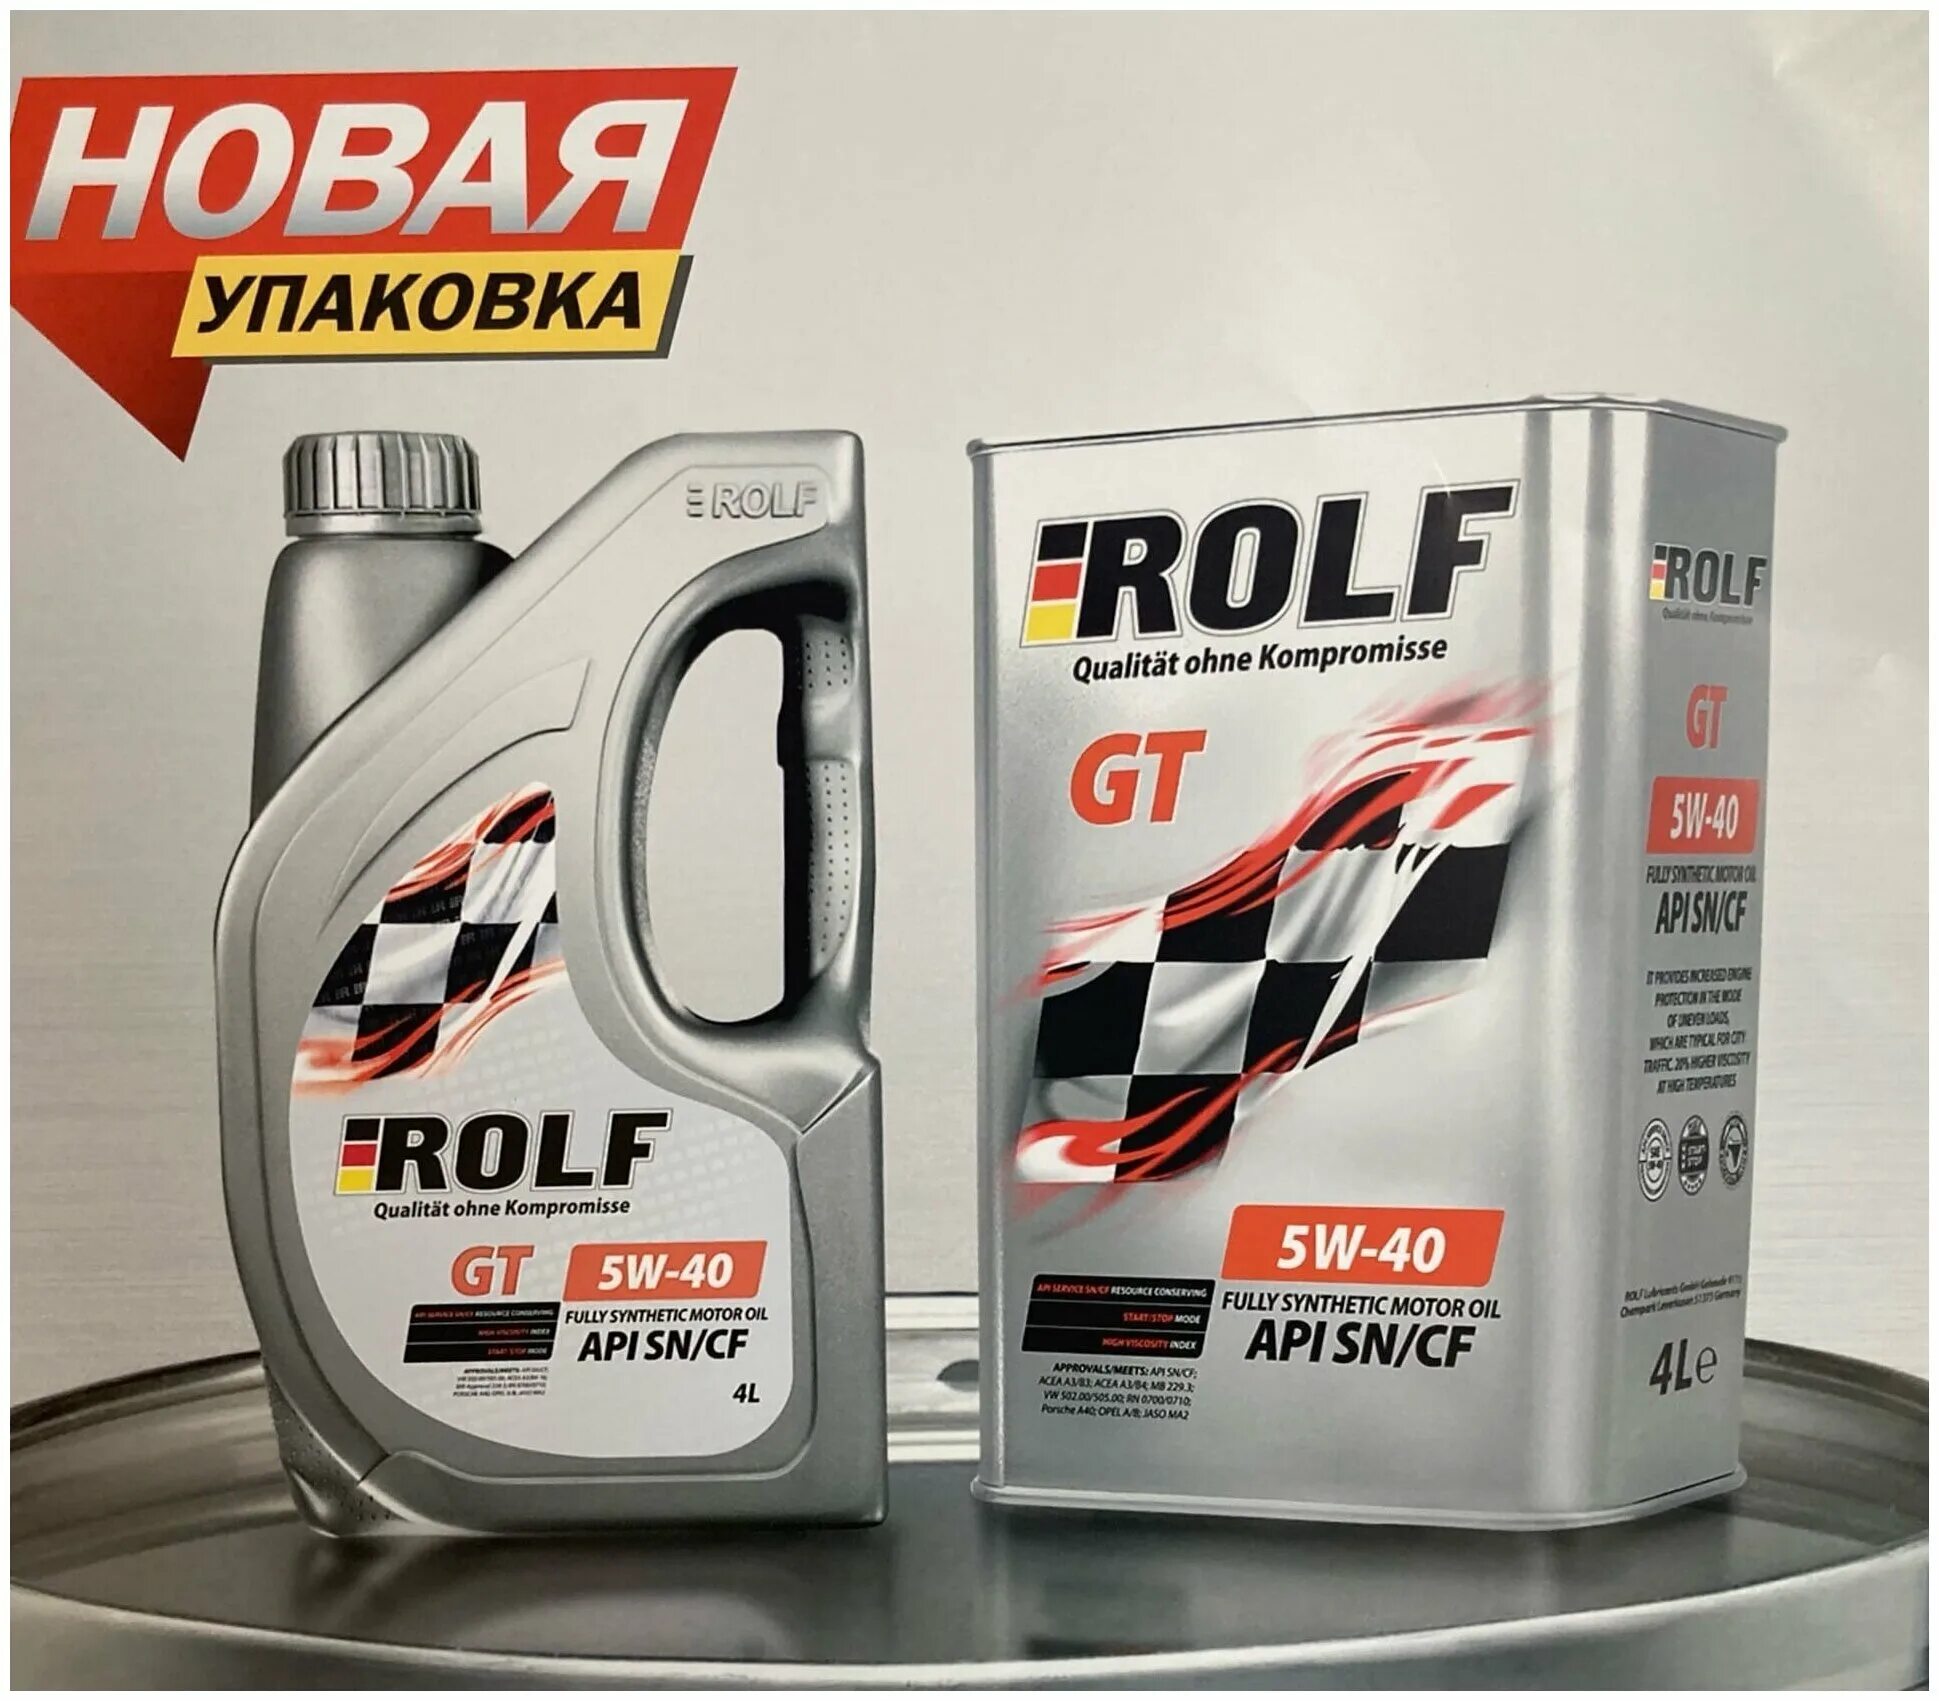 Rolf gt 5w-40. Rolf gt SAE 5w-40. Масло моторное 5w40 РОЛЬФ gt. Rolf gt SAE 5w-40, API SN/CF 4+1.